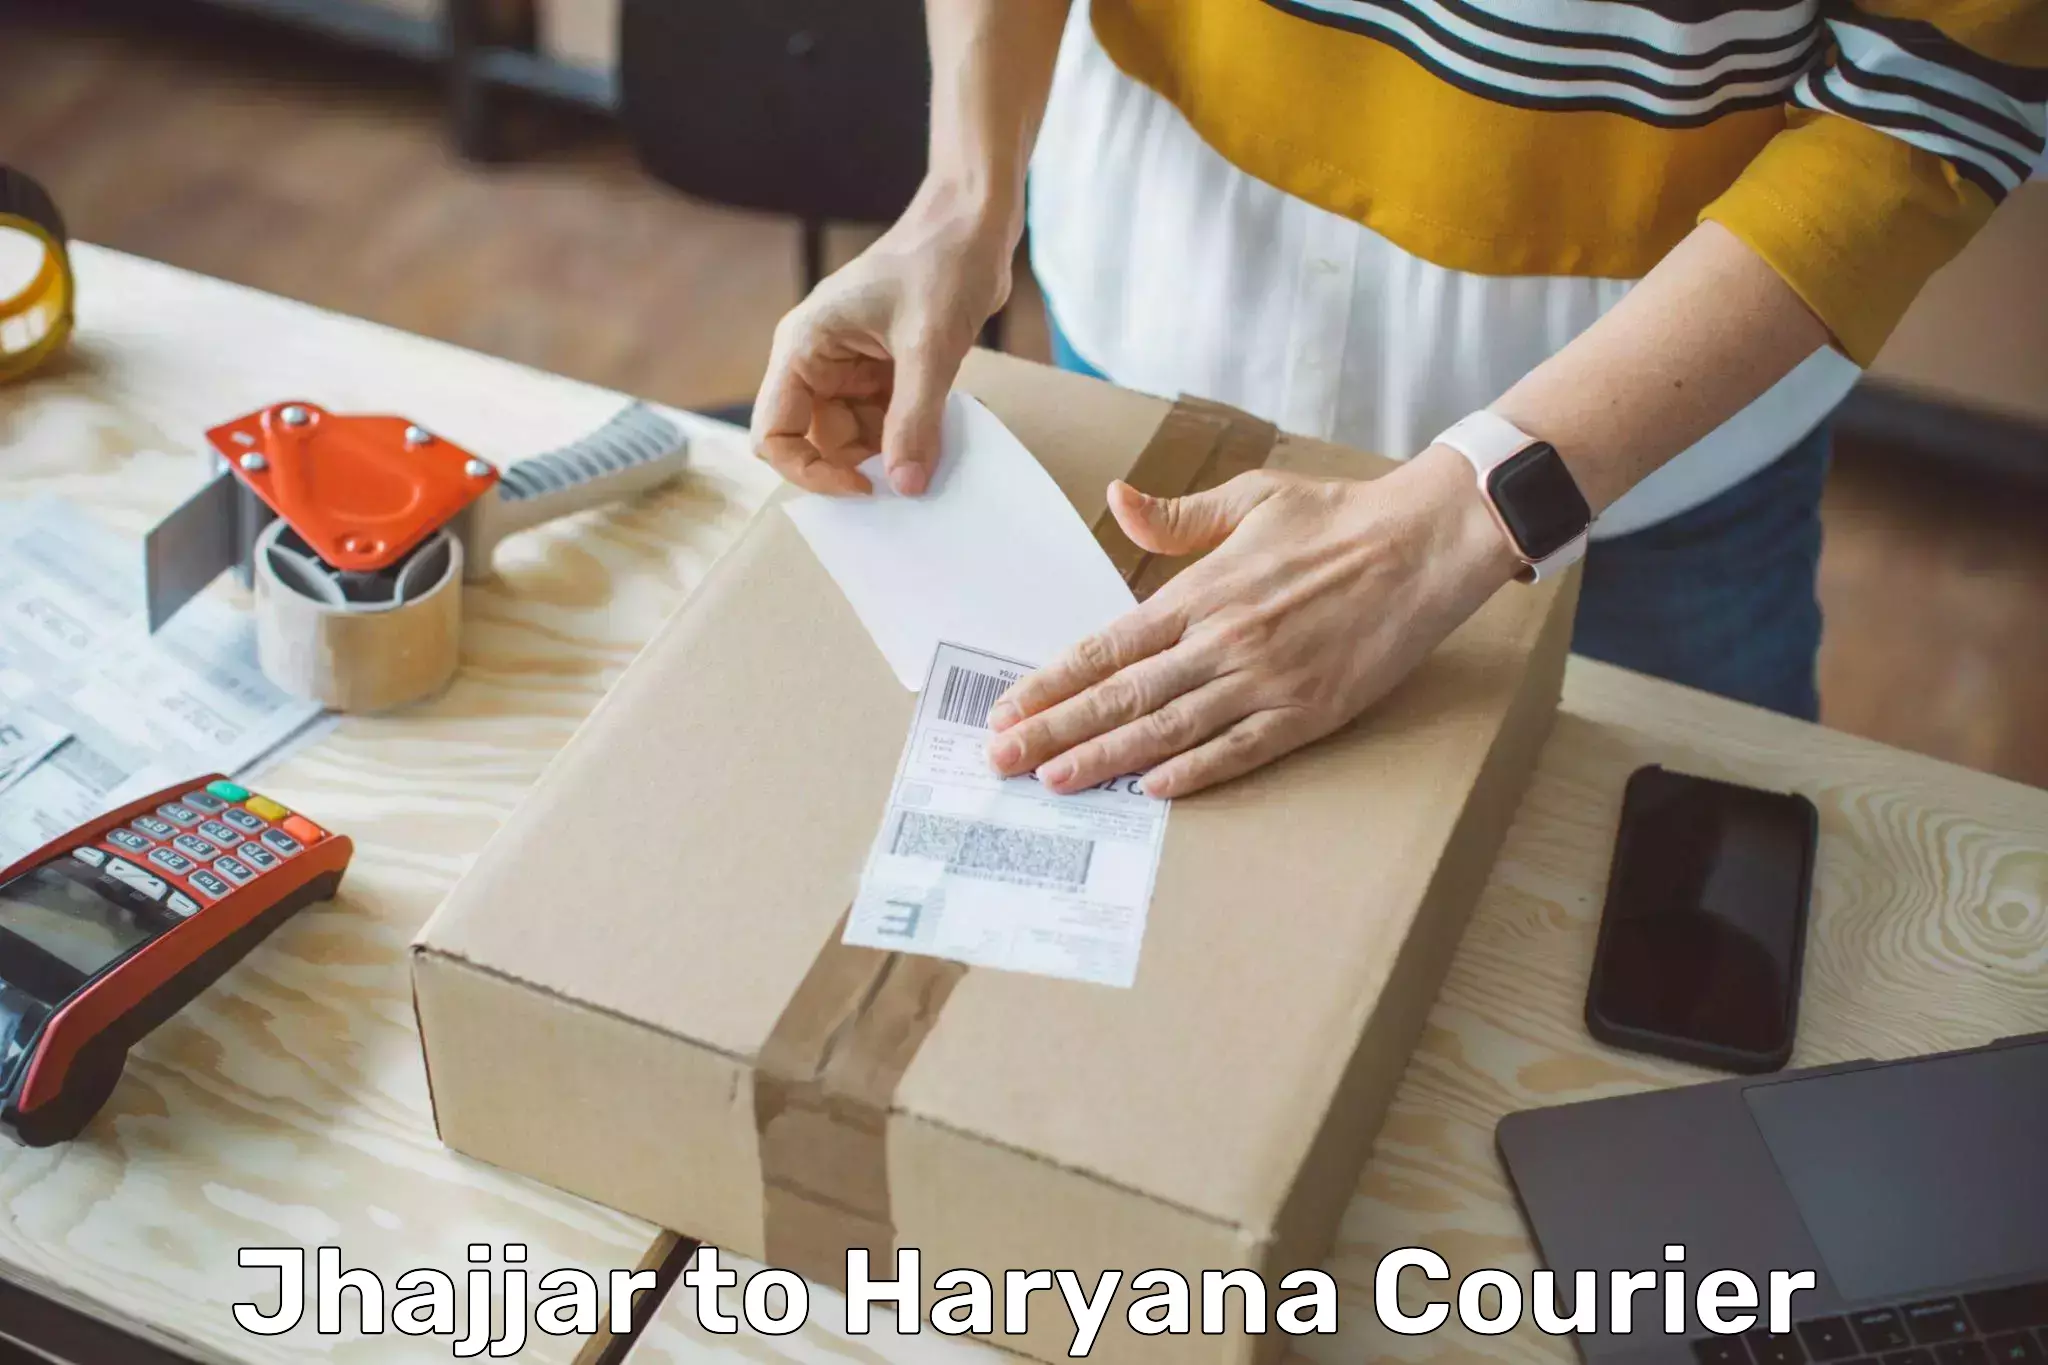 Express delivery capabilities Jhajjar to Sonipat